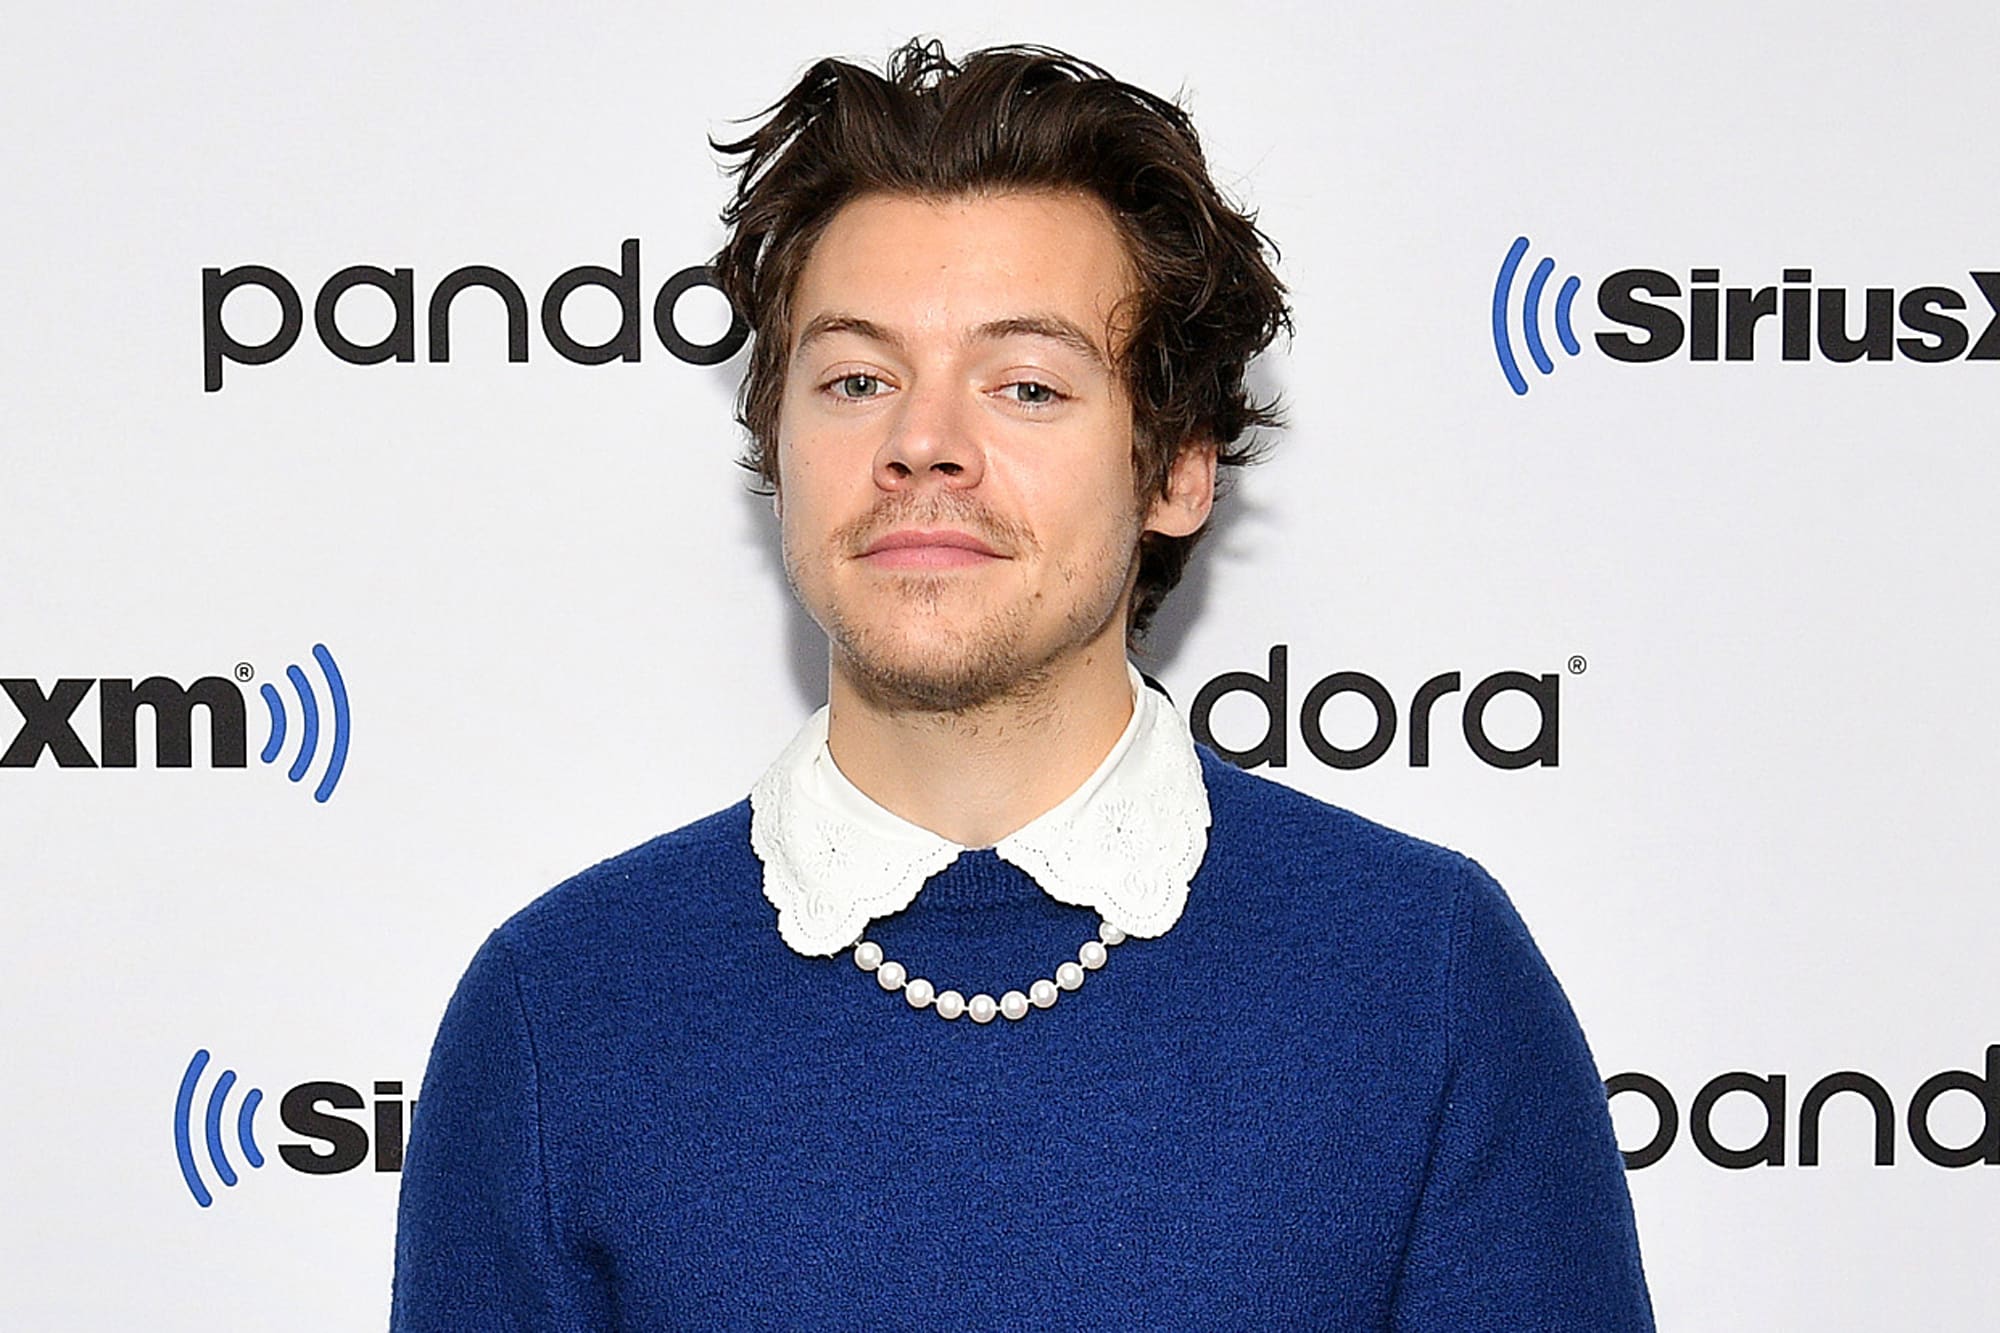 harry-styles-takes-to-instagram-to-speak-up-against-gun-violence-promises-to-dedicate-1-million-to-end-gun-violence